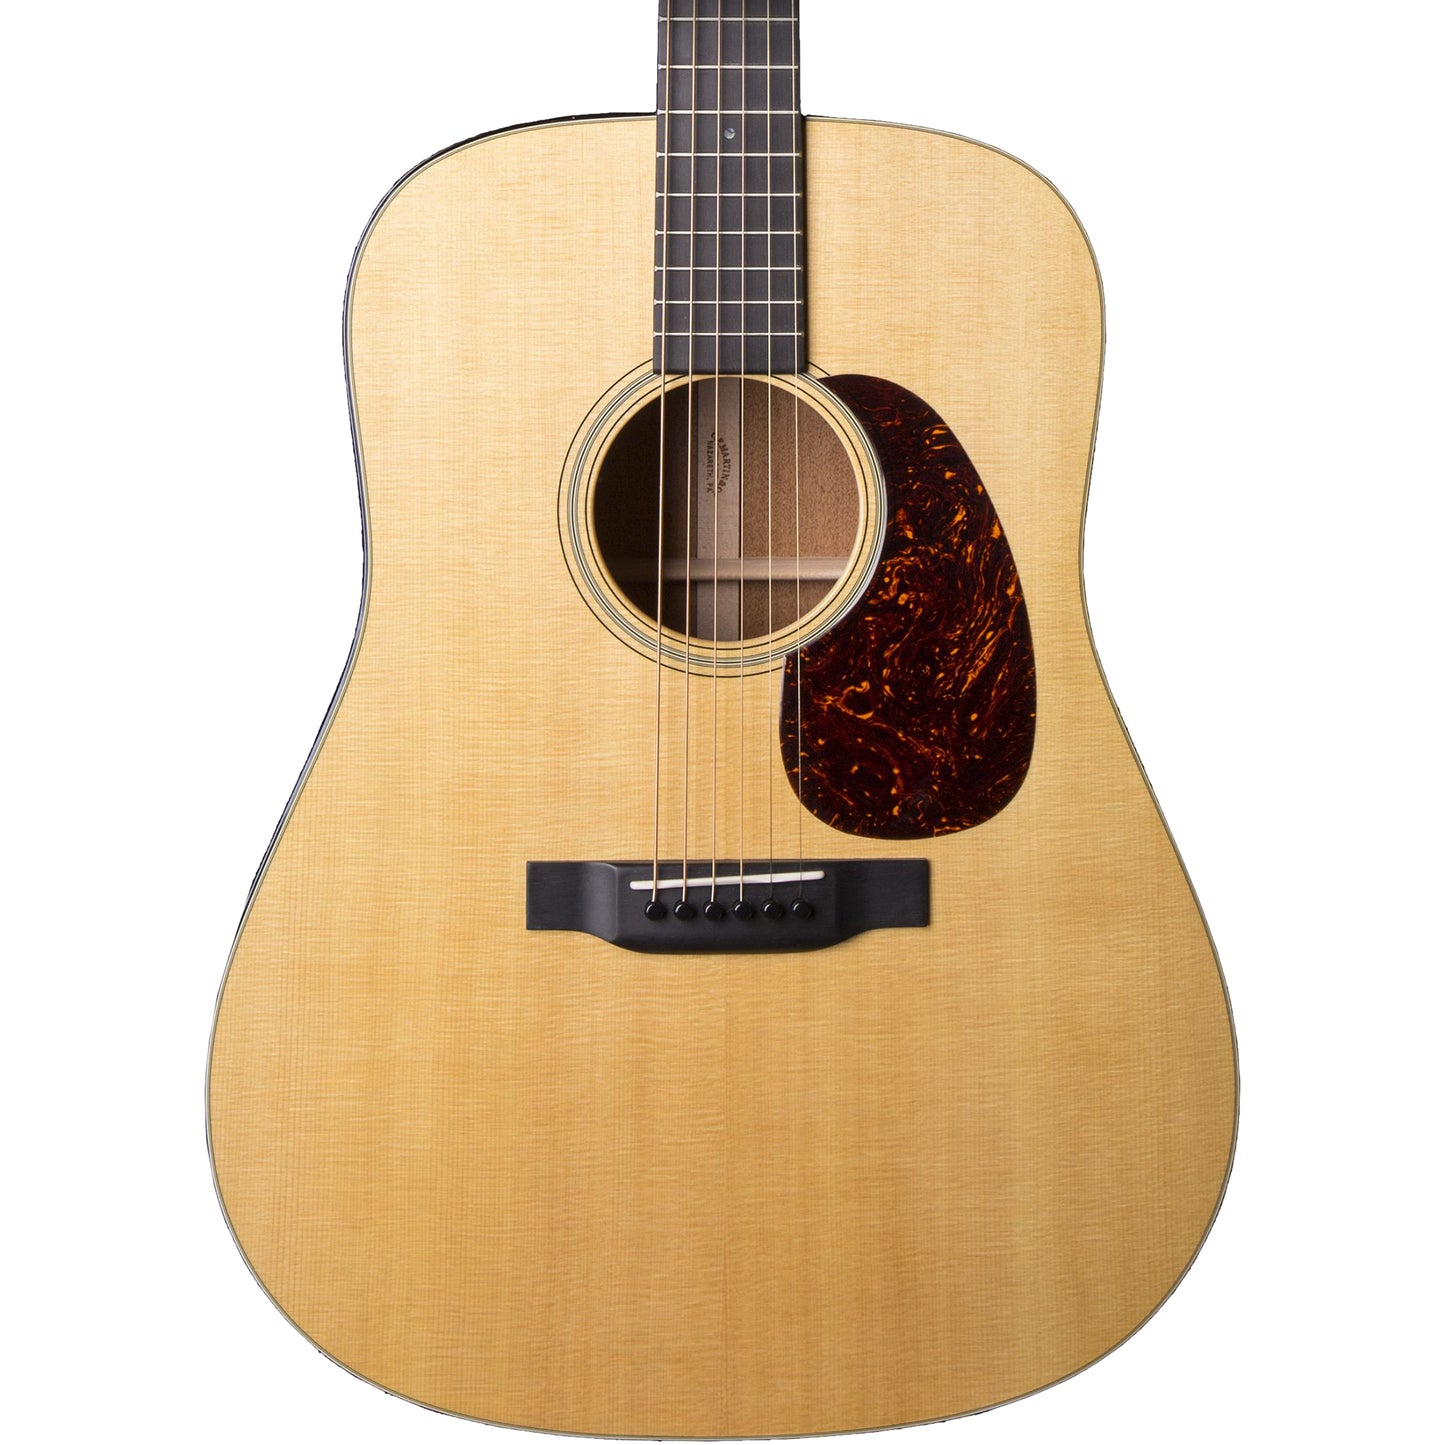 Martin D-18 Standard Series Dreadnought Acoustic Guitar Natural with Case